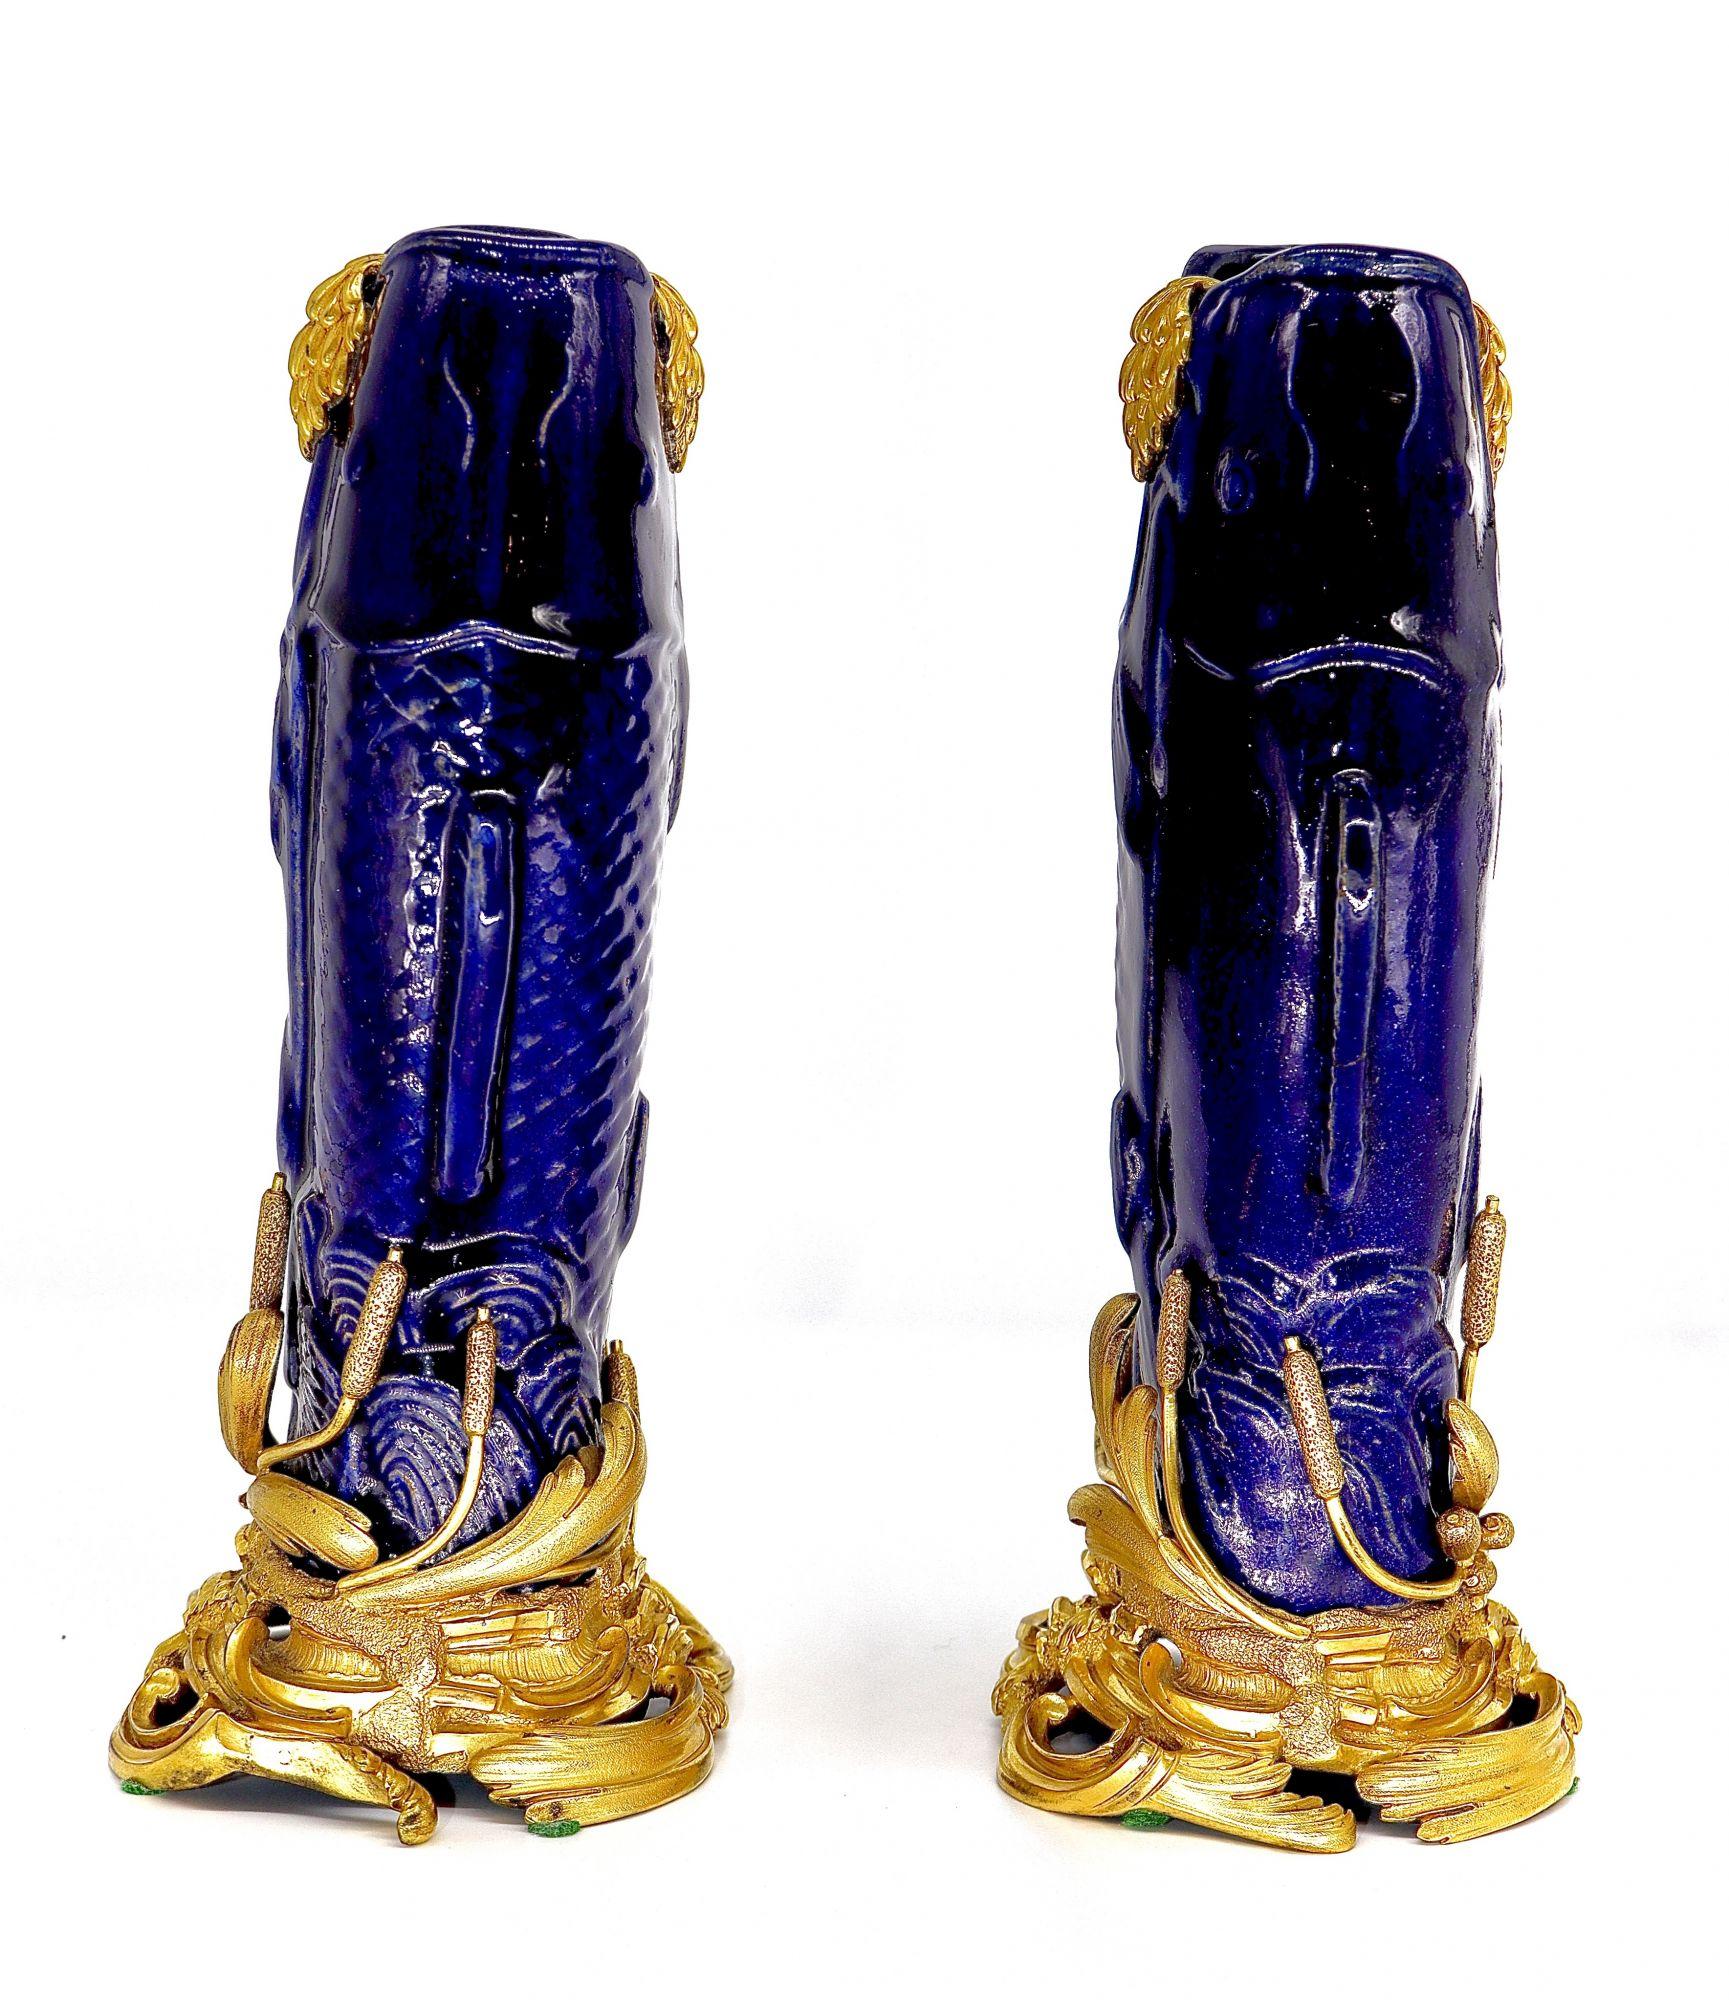 Gilt 1750 Circa, a Pair of Mounted Porcelain Karp Shaped Vases For Sale